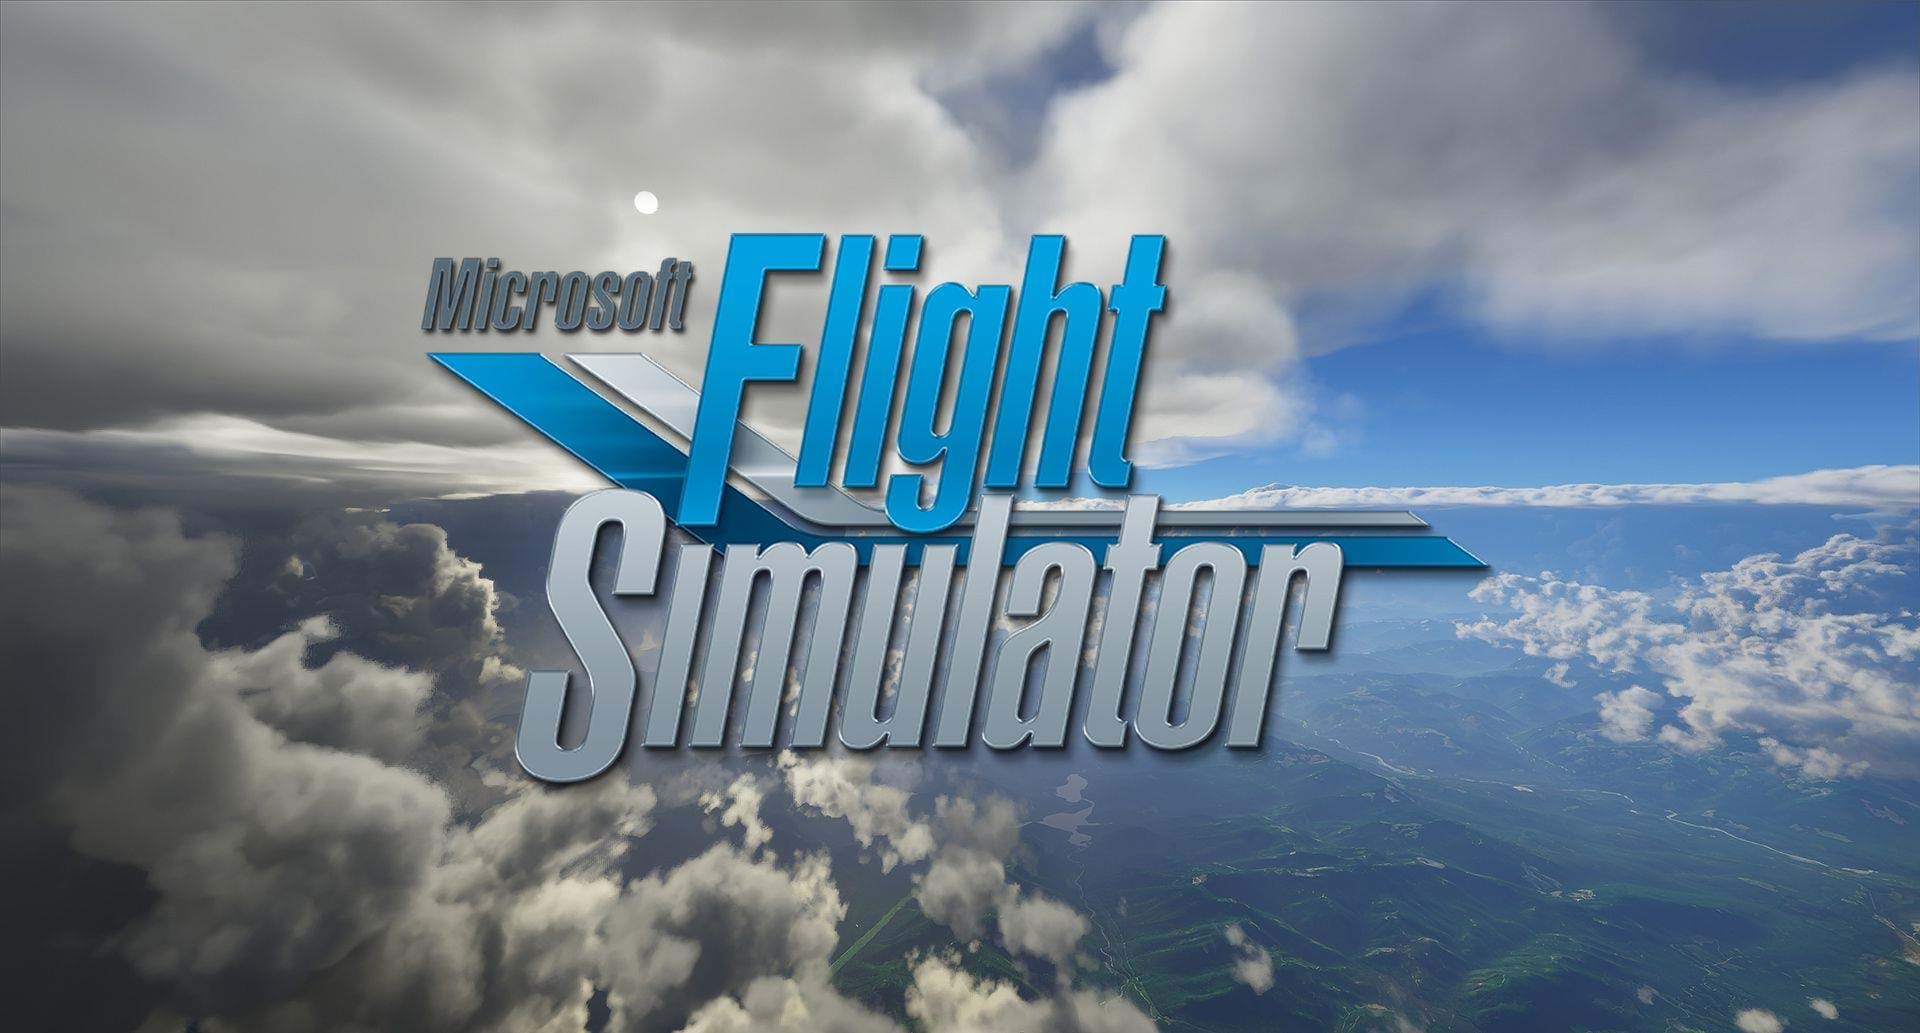 Hands On: Microsoft Flight Simulator 2020 Global Preview Event